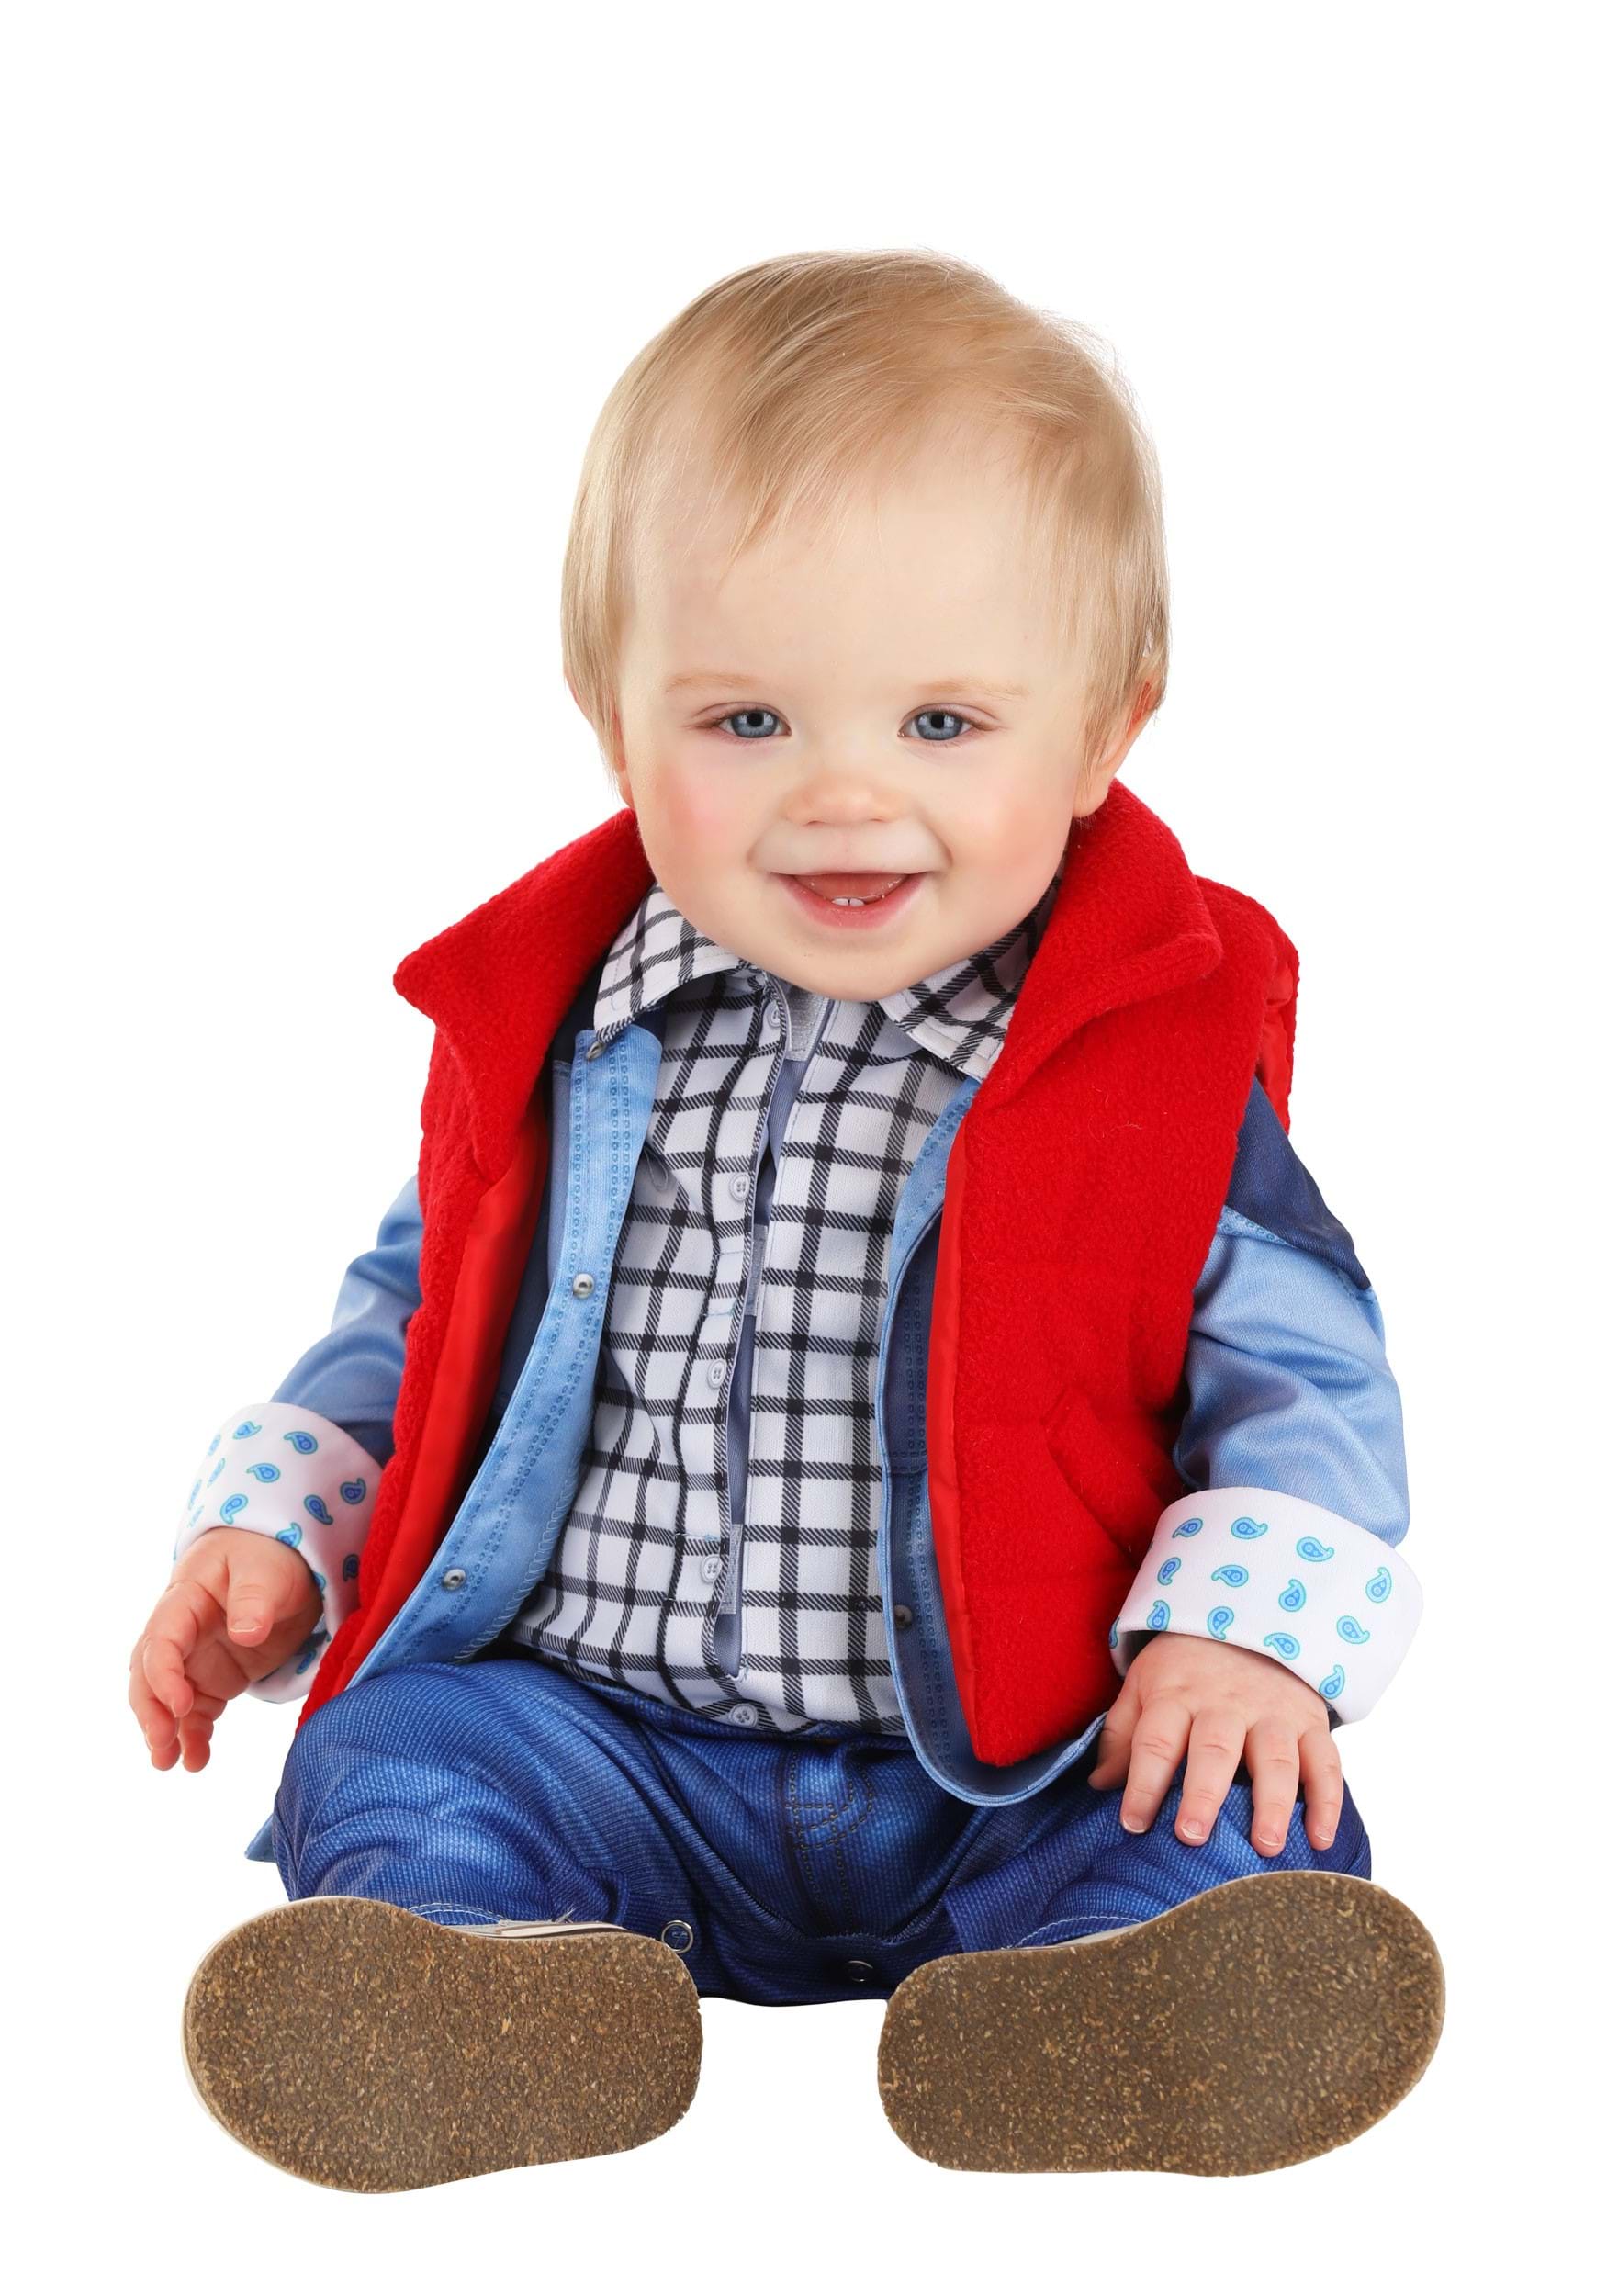 Photos - Fancy Dress FUN Costumes Marty McFly Back to the Future Infant Costume Blue/Red